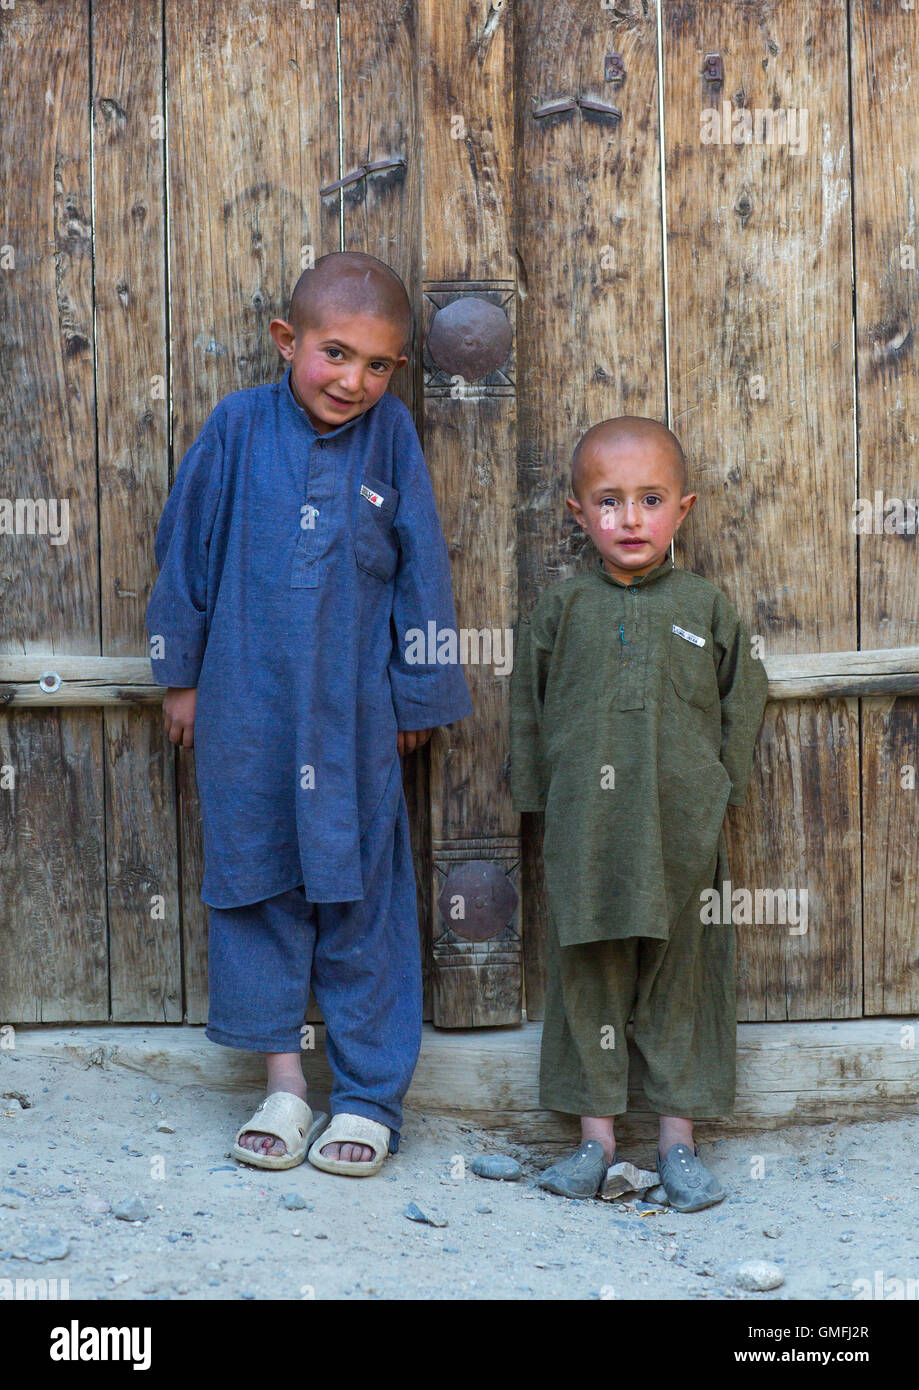 Afghan boys with shaved heads standing in front of a wooden door, Badakhshan province, Khandood, Afghanistan Stock Photo